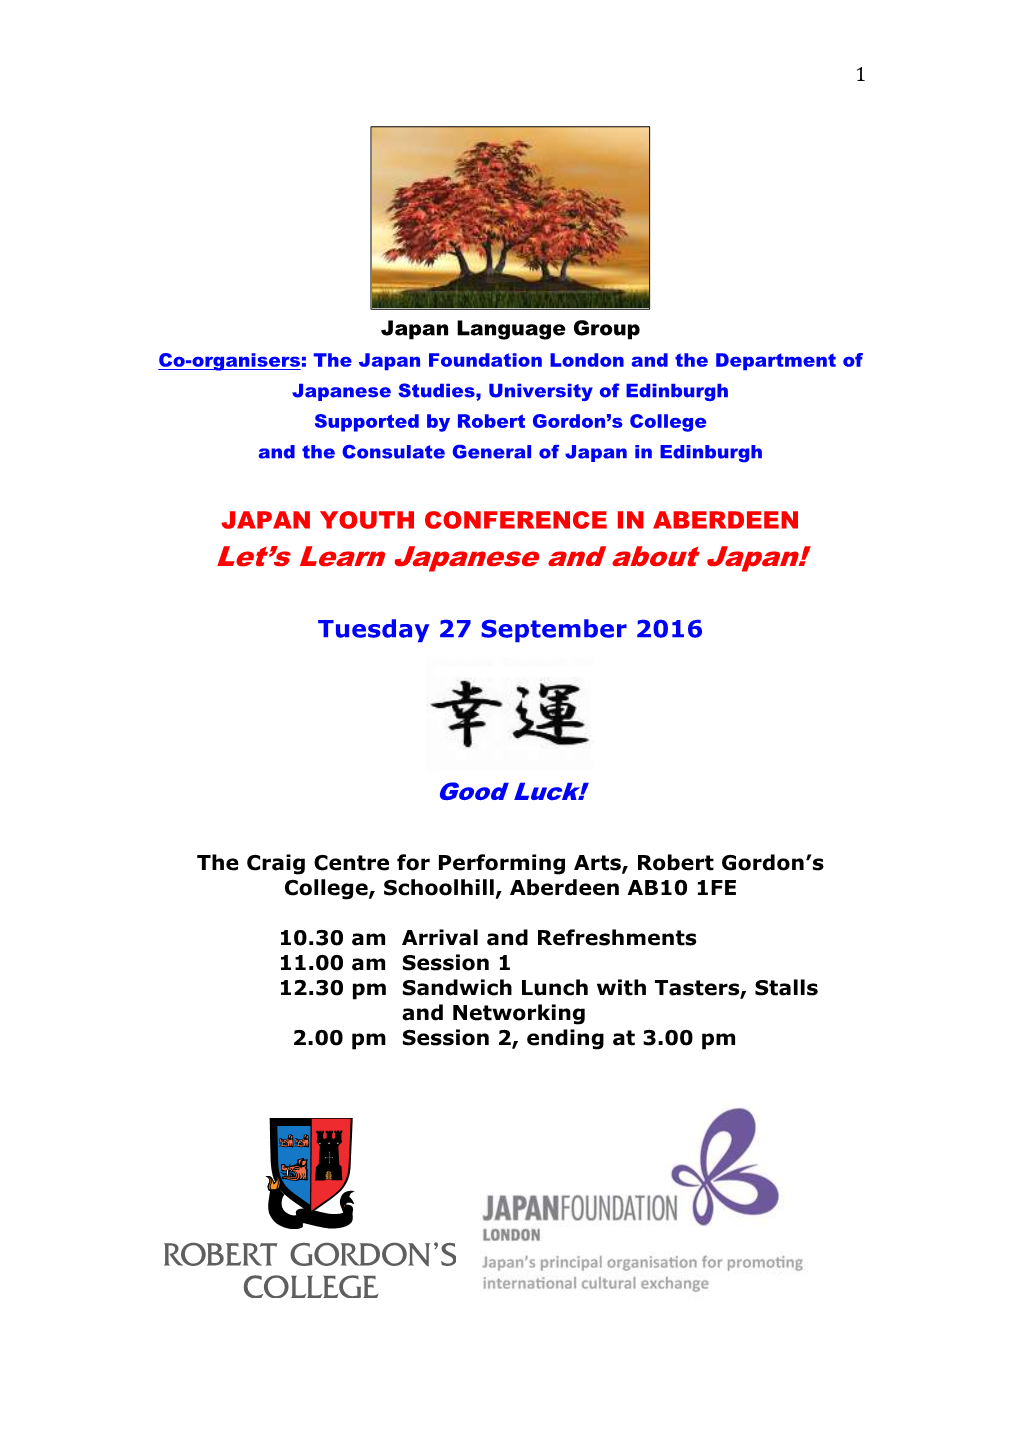 Japan Youth Conference Programme